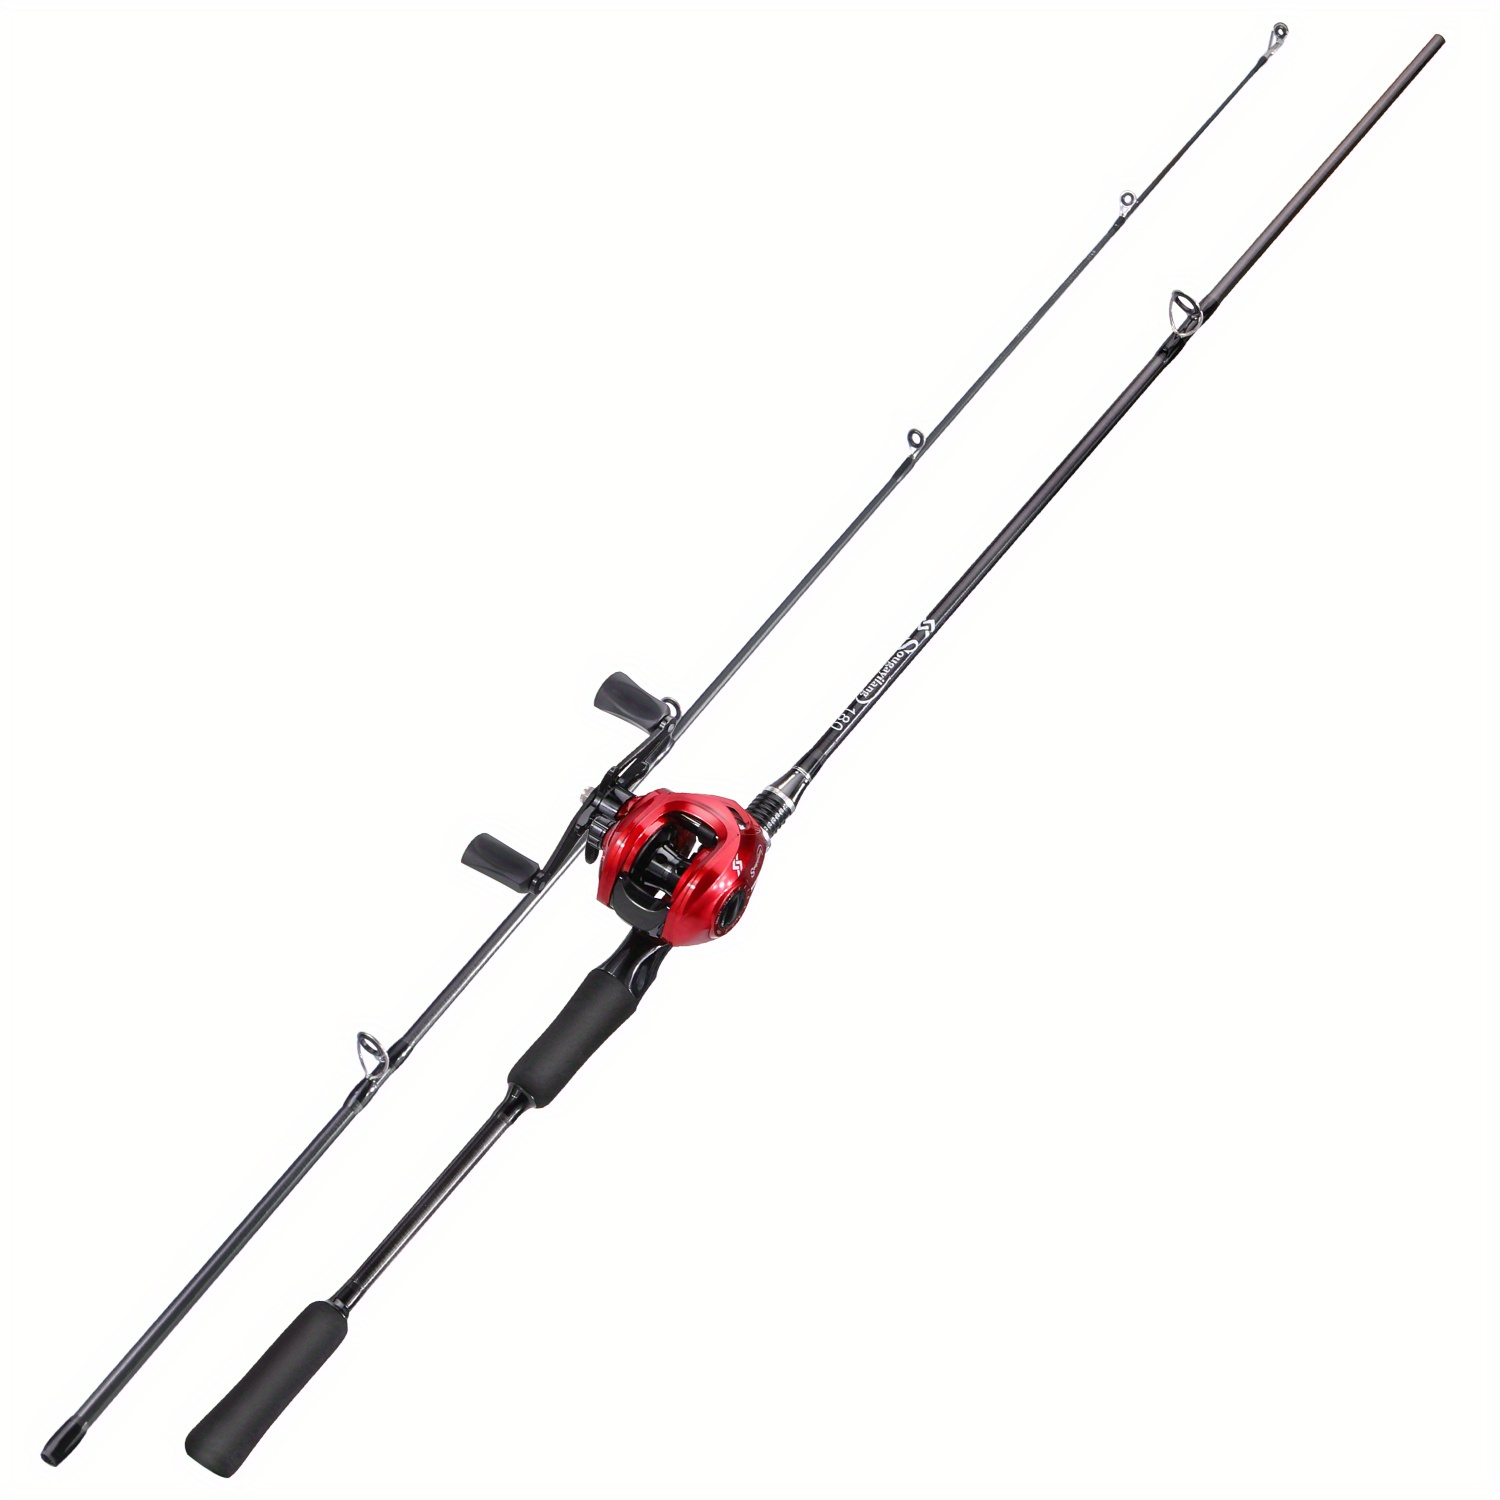 Sougayilang Fishing Rod and Reel Combo 2 Pieces M/MH Fishing Pole with Baitcasting Reel Set Baitcaster Combo, Size: 6′9′′Rod and Left Hand Reel, Red